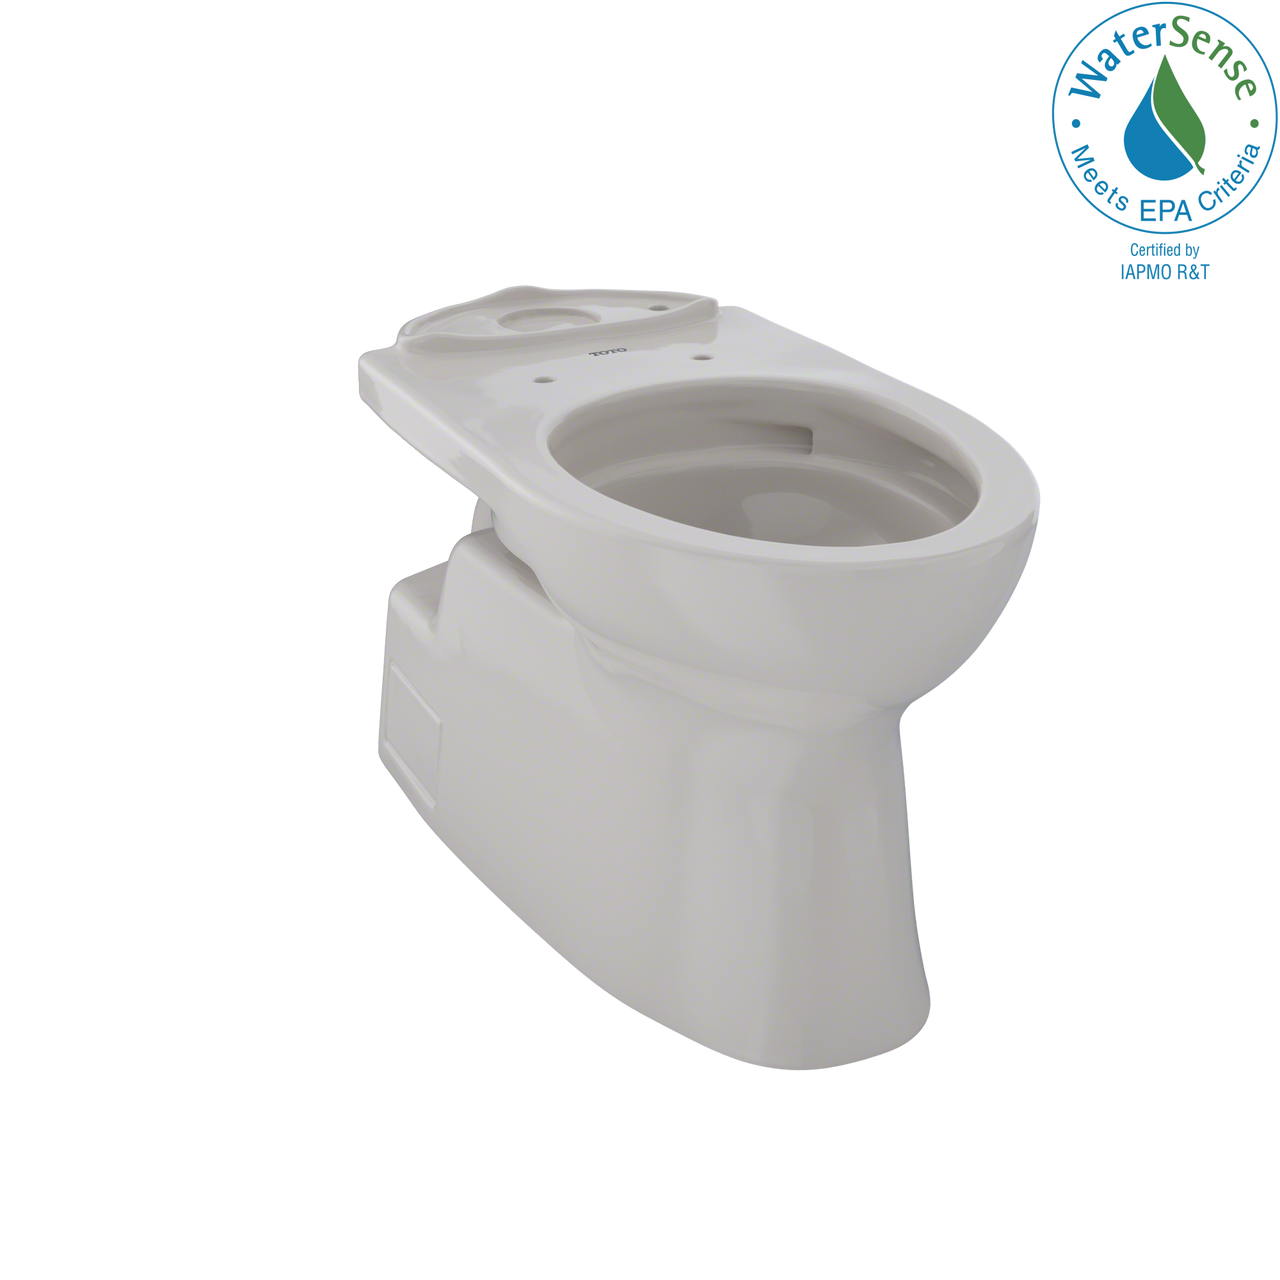 TOTO Vespin II Universal Height Elongated Skirted Toilet Bowl with CeFiONtect,  - CT474CUFG#12 - BNGBath